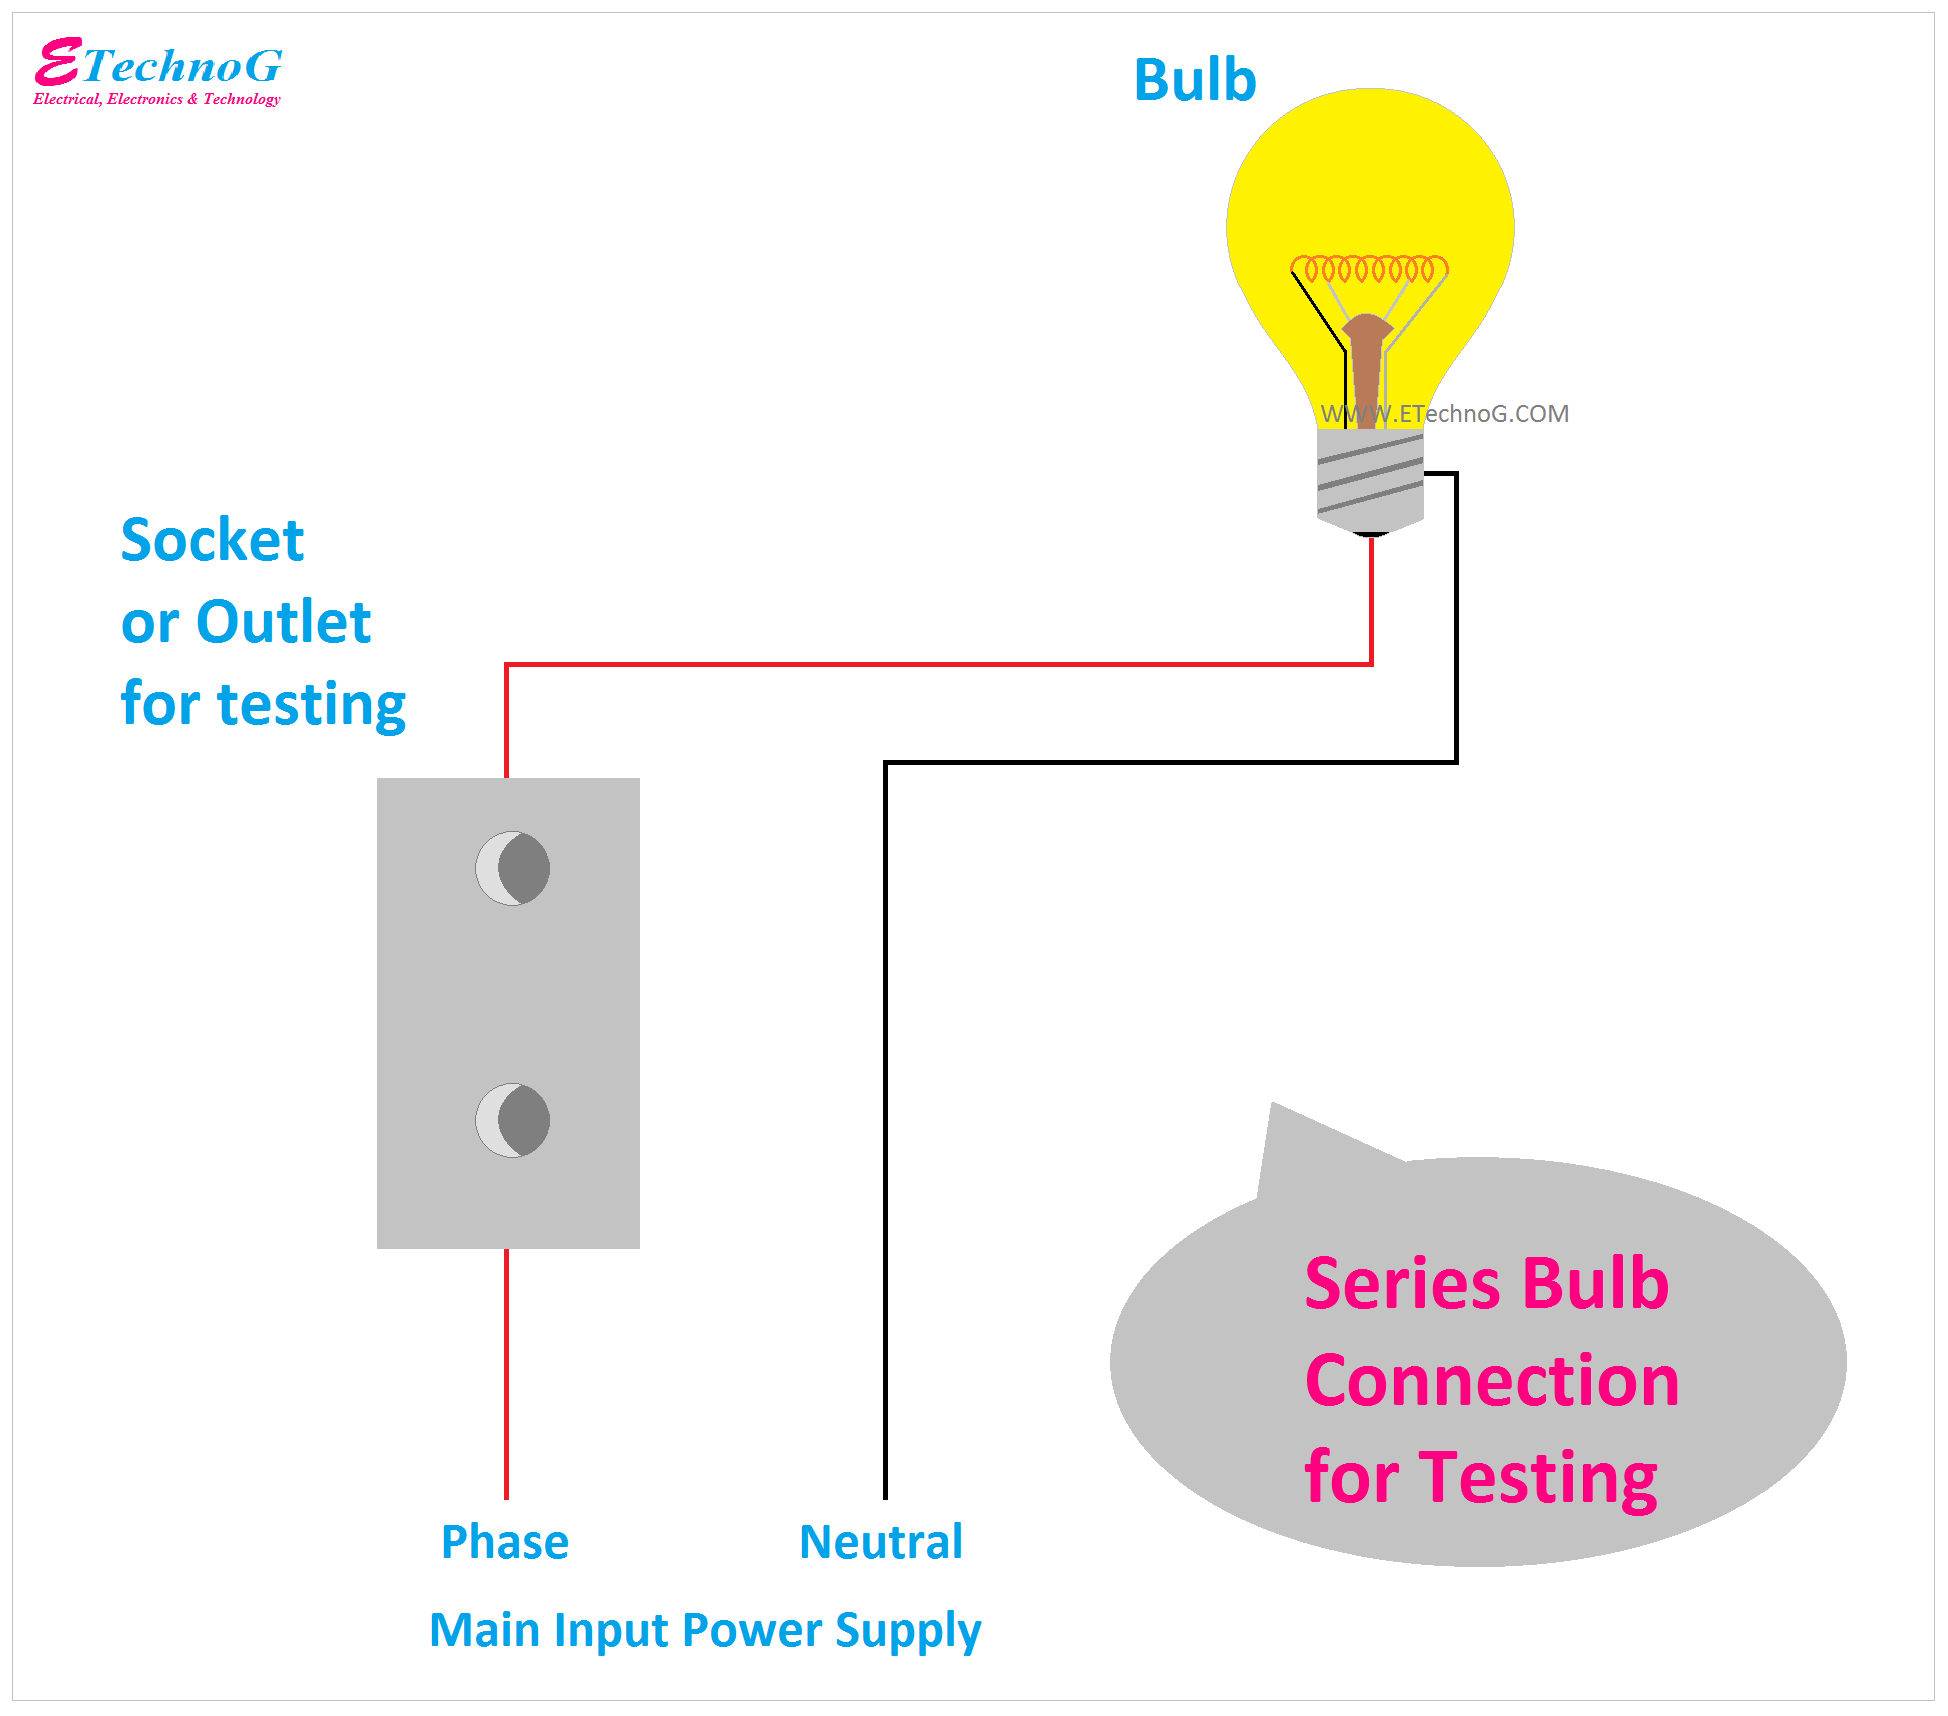 Series Bulb Connection for Testing